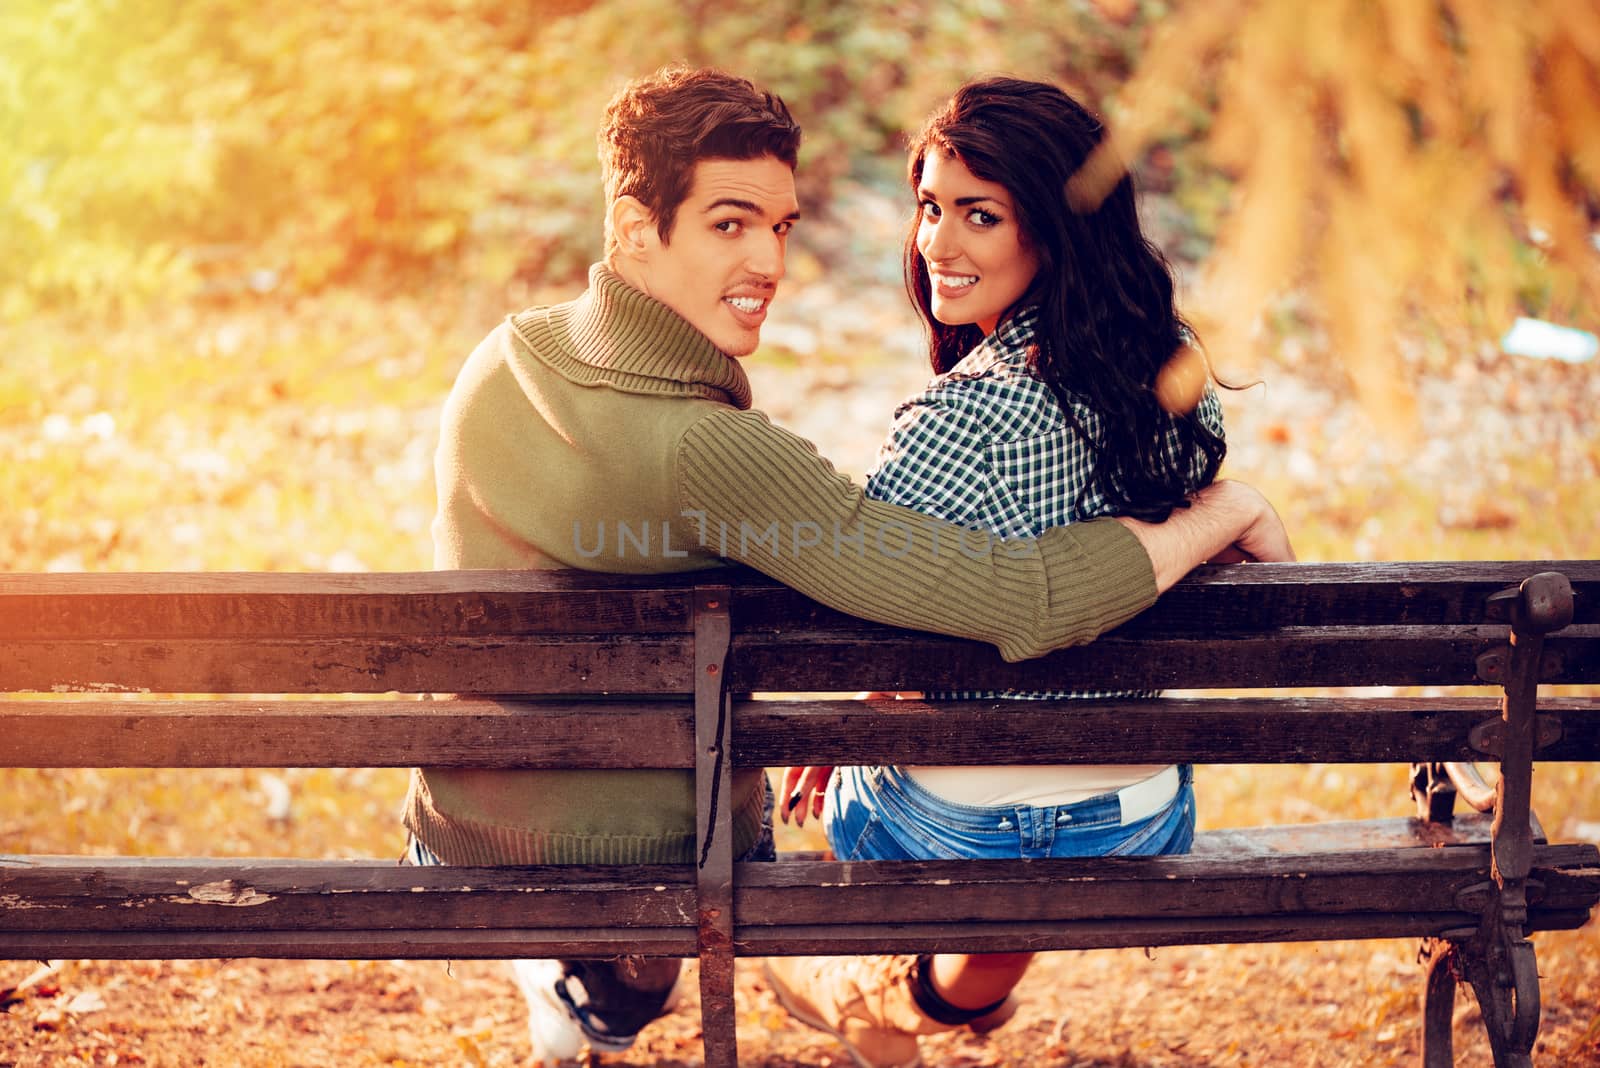 Beautiful lovely couple sitting on the bench and enjoying in sunny park in autumn colors. Looking at camera. Rear view.